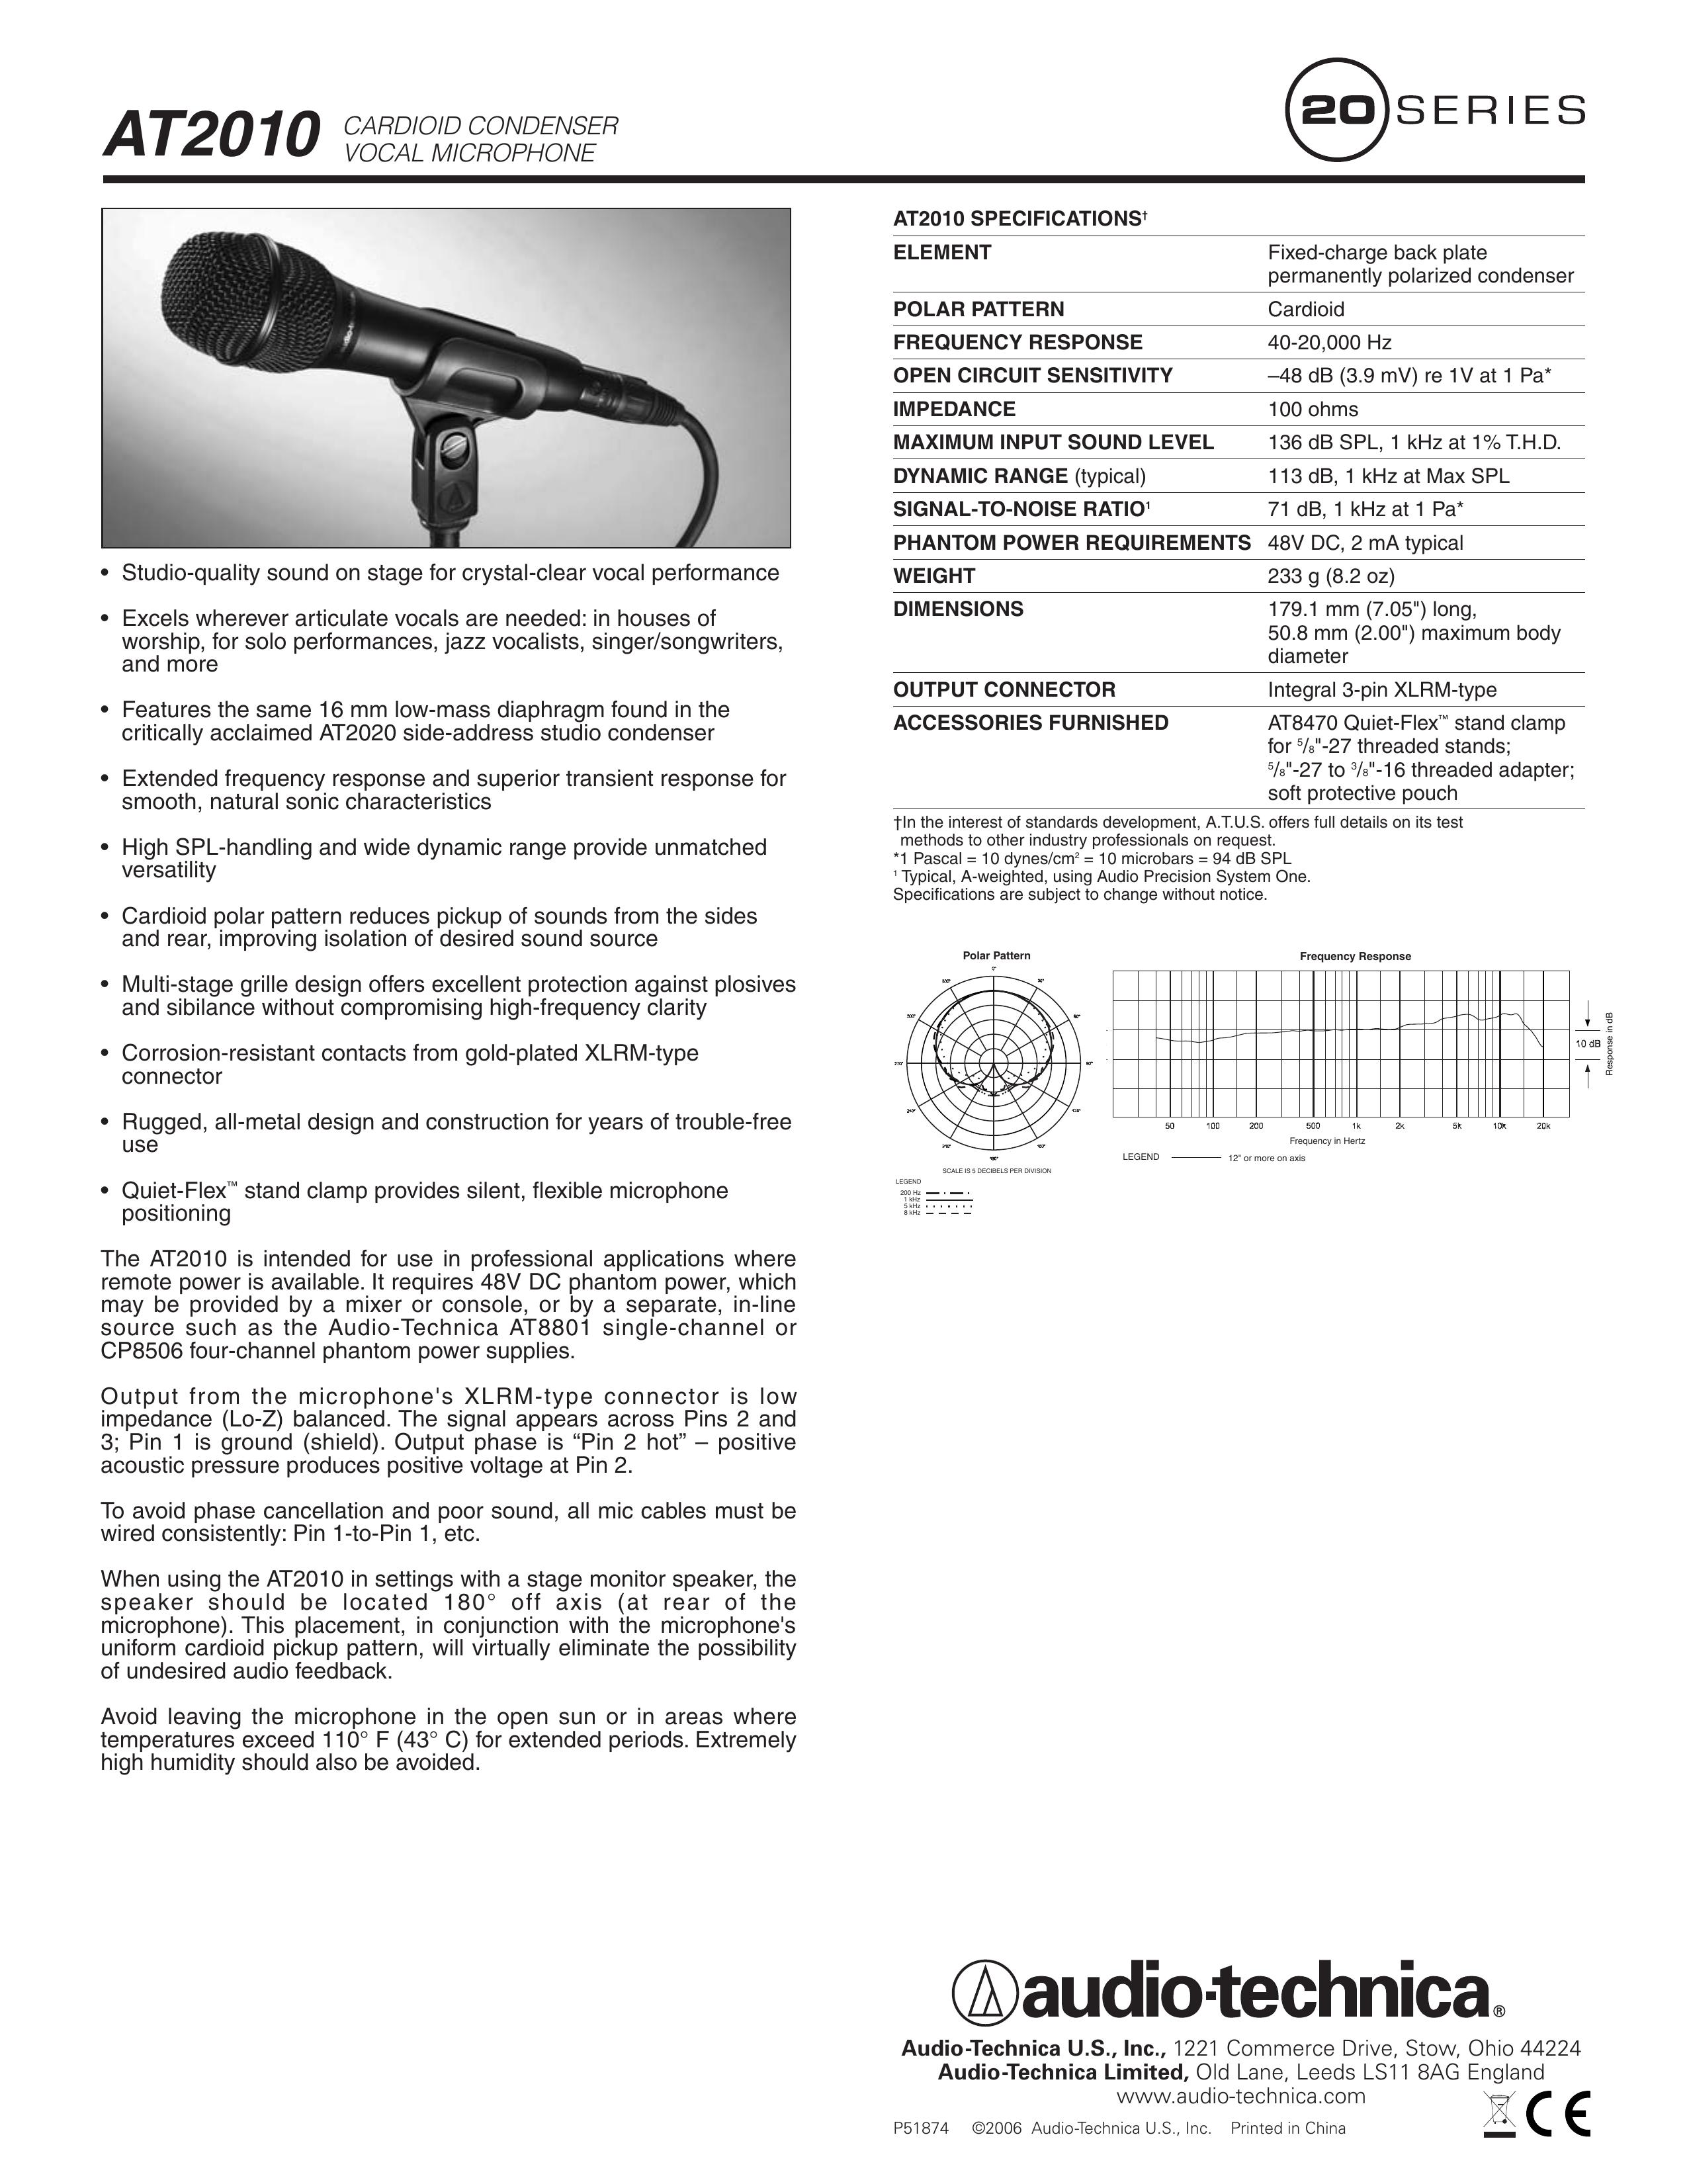 Audio-Technica AT2010 Microphone User Manual